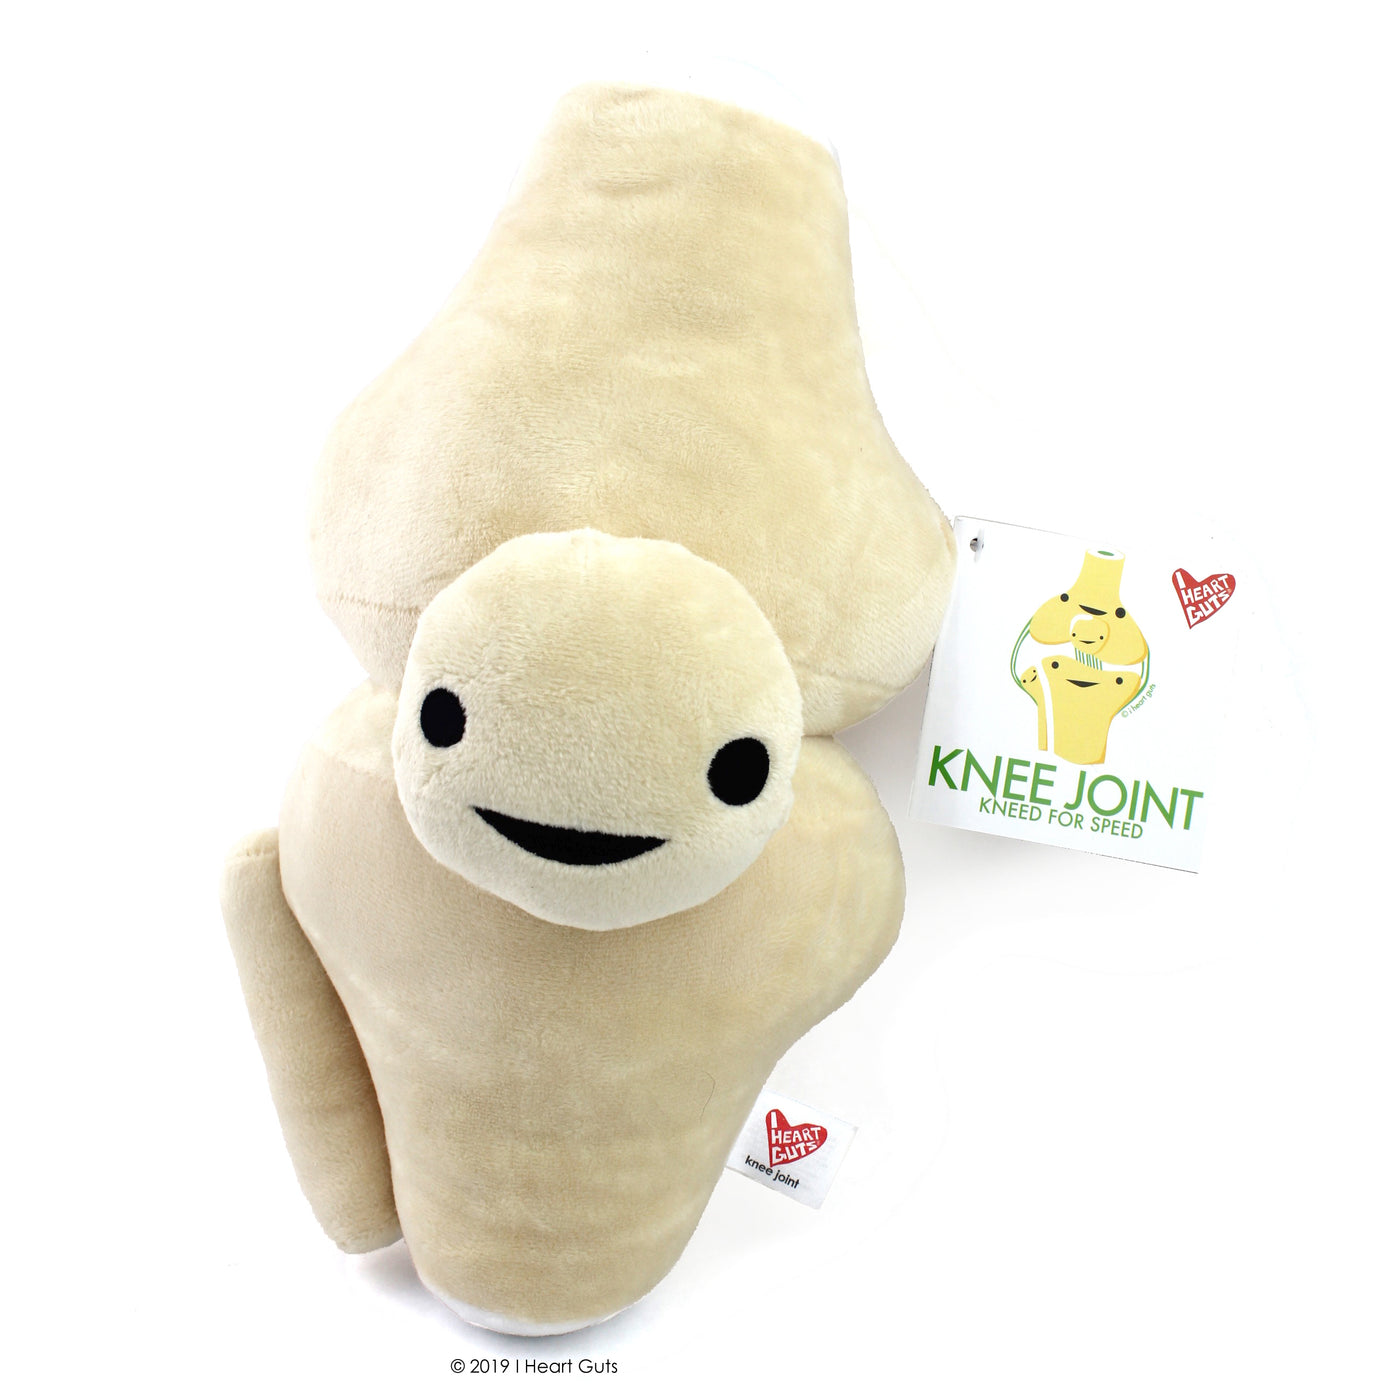 Knee Joint Plush - Kneed for Speed - Knee Replacement Gift - I Heart Guts